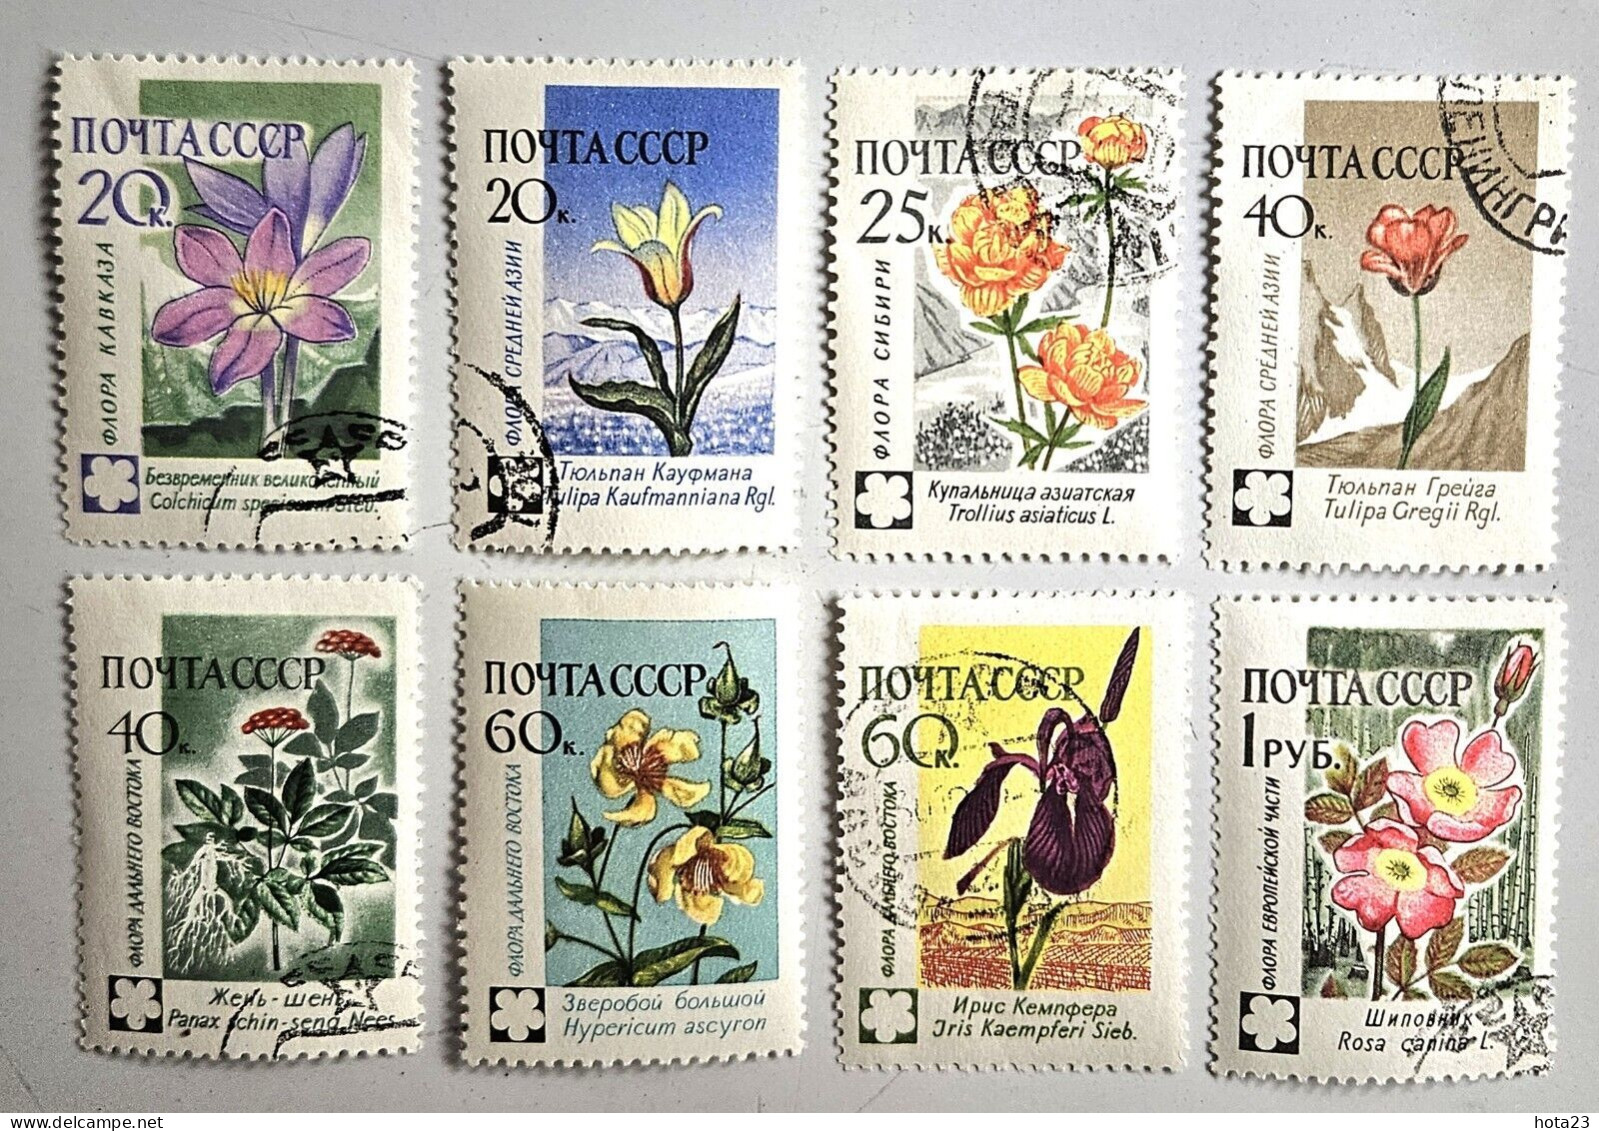 (!) Russia-USSR 1960 Native Flowers, CTO Complete Set, Sc # 2408-15 Used  (0) - Gebraucht